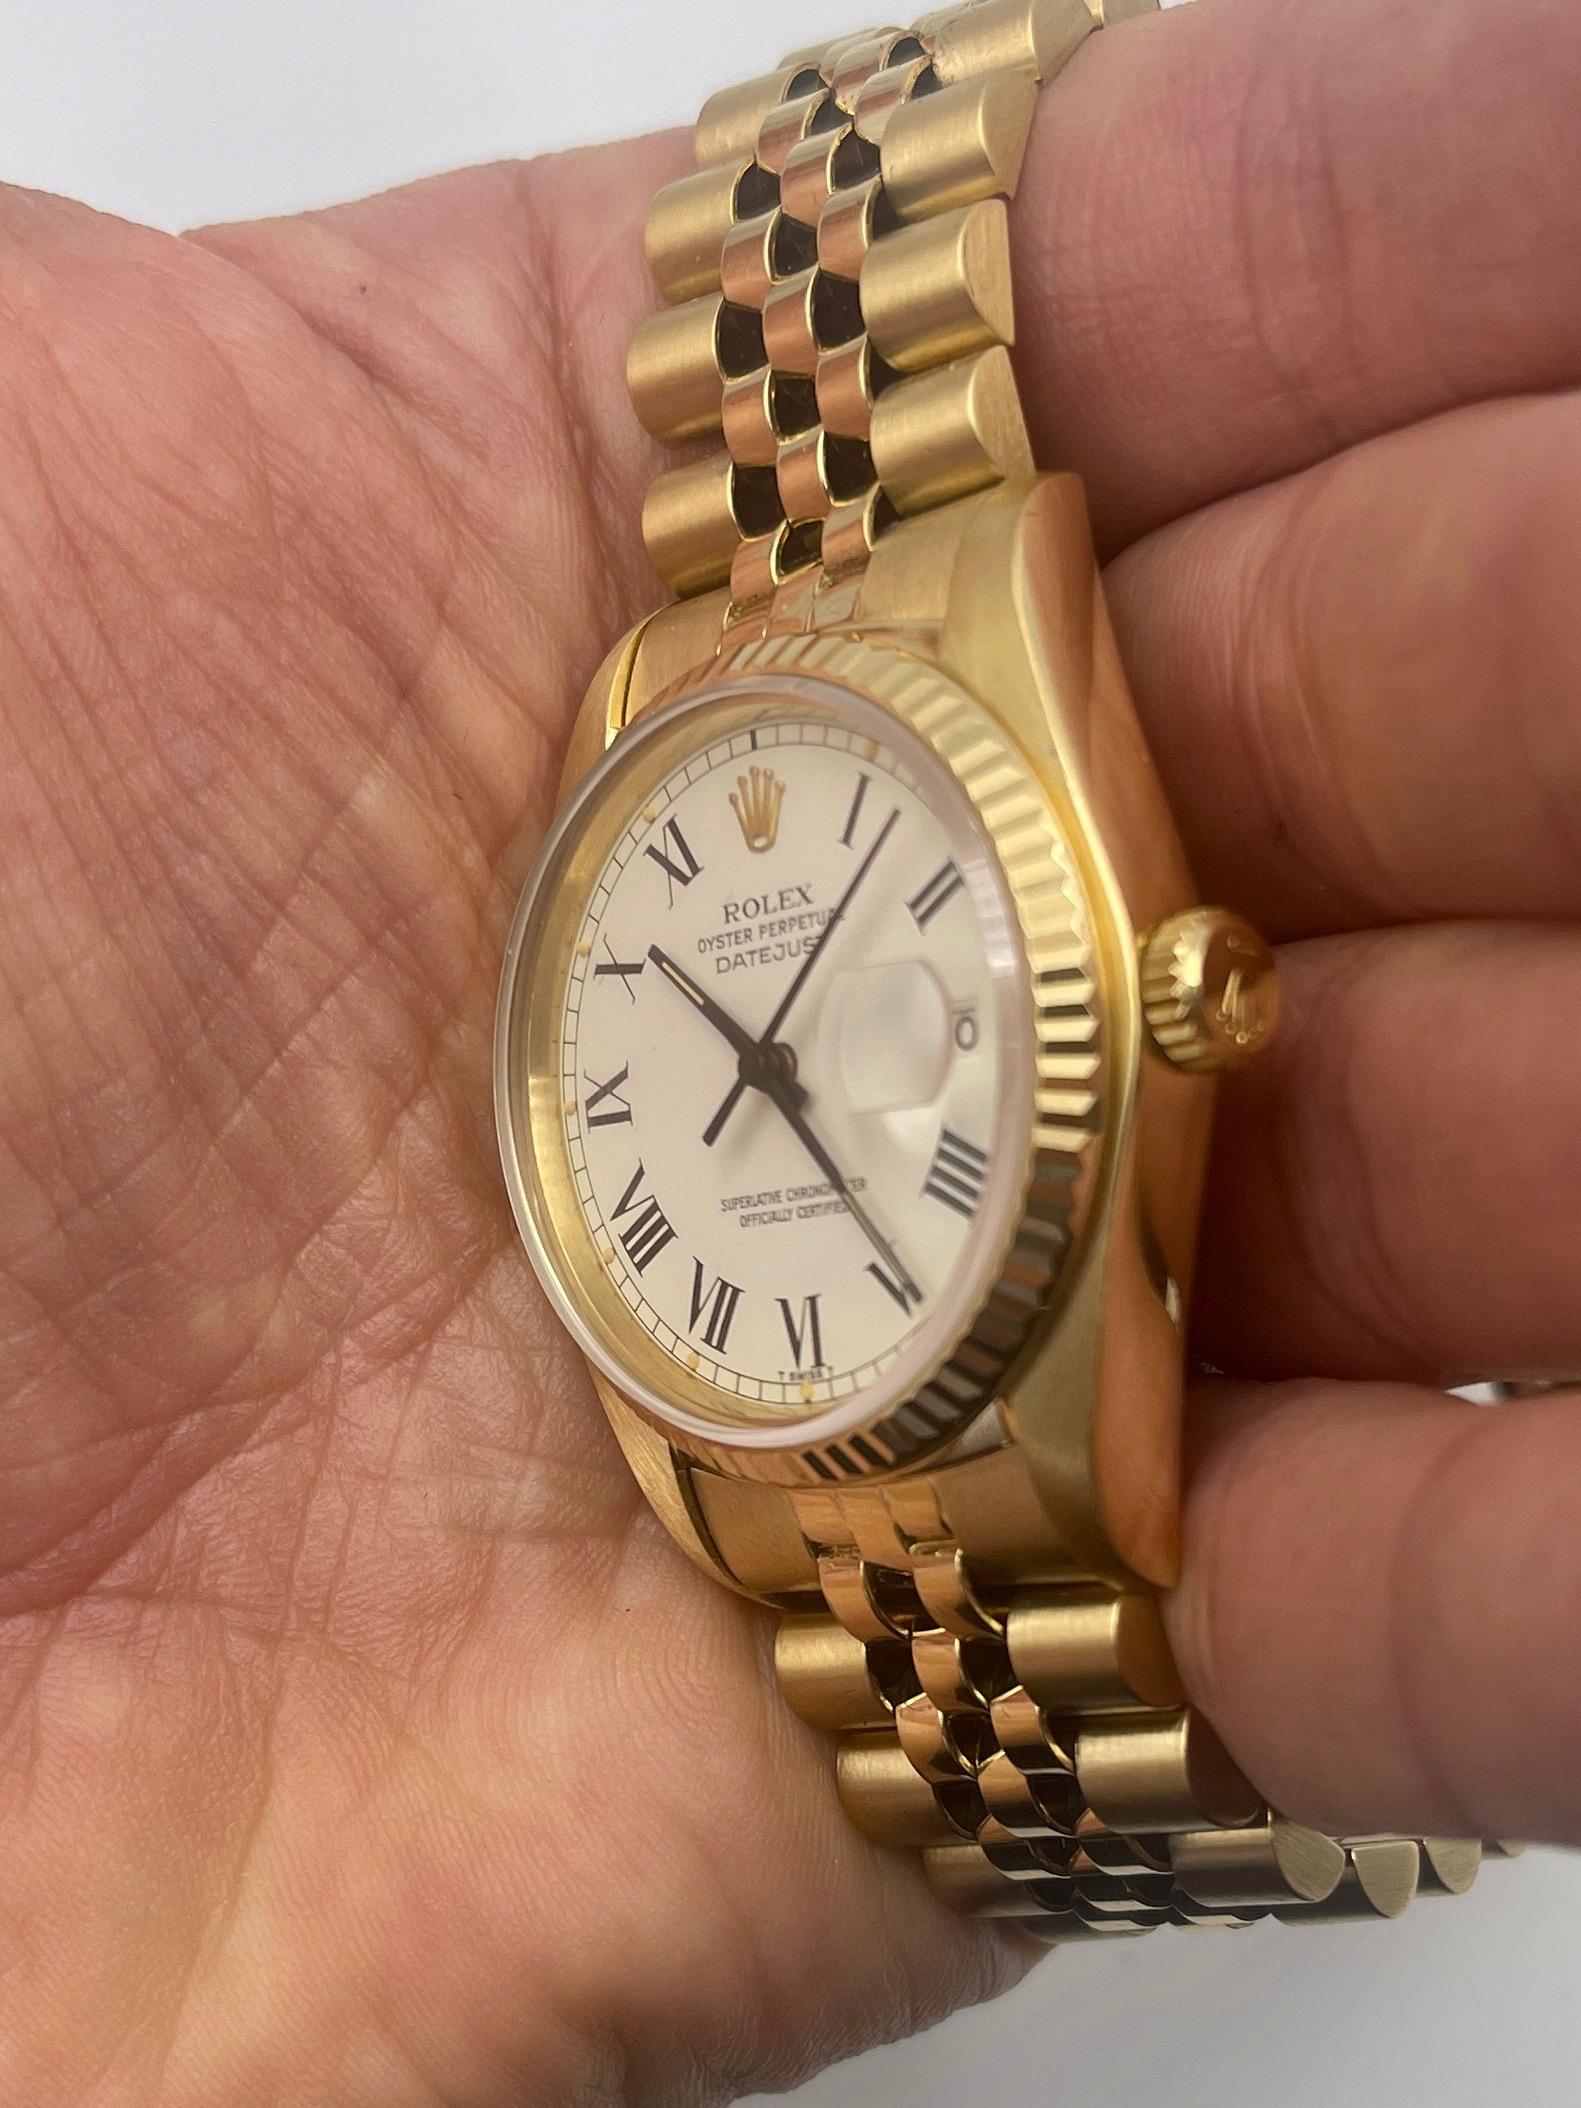 Rolex Datejust 18k Gold Reference 16018 Watch 4